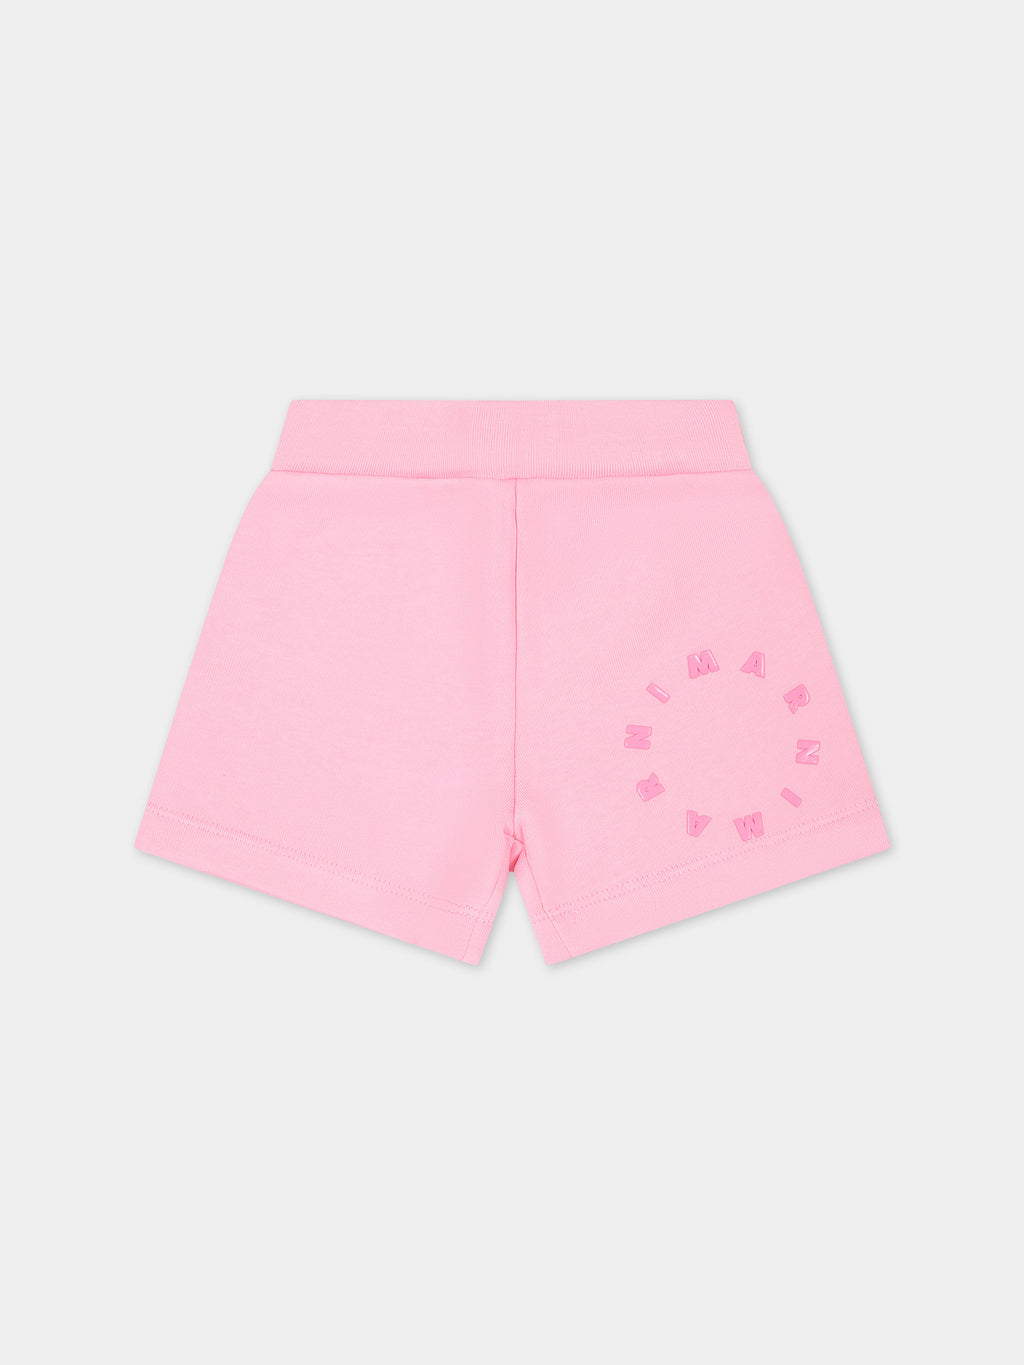 Pink shorts for baby girl with logo